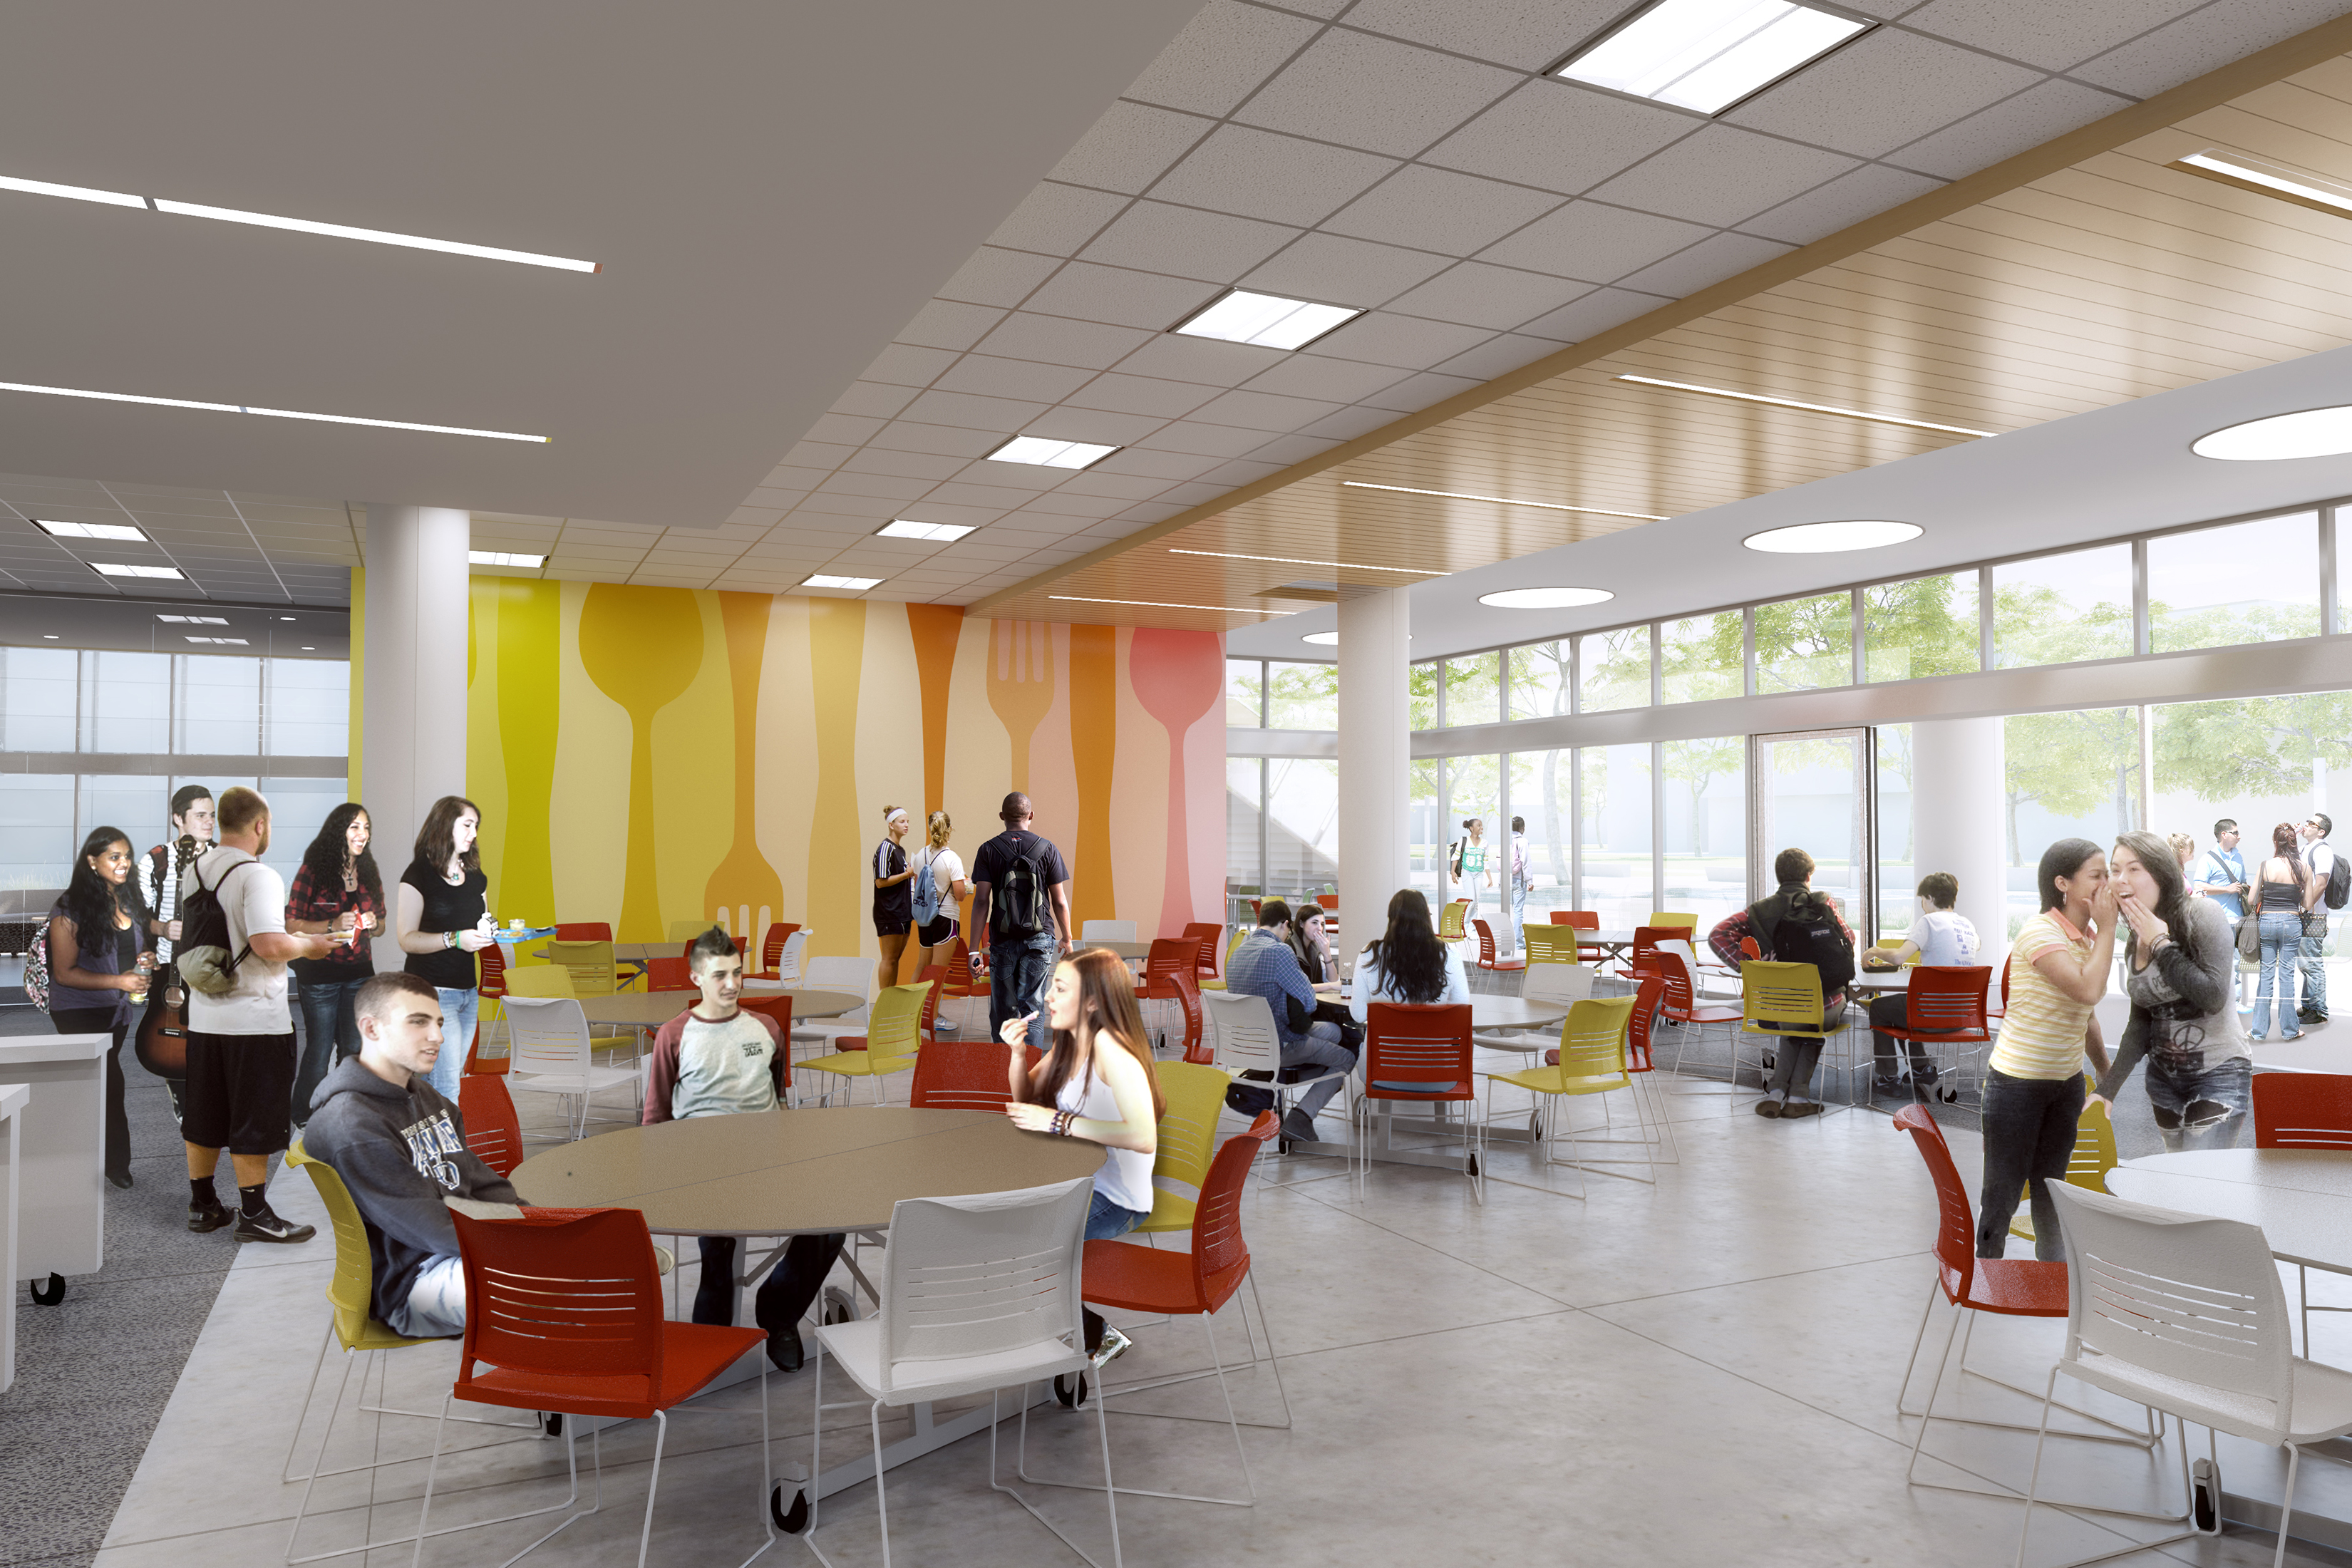 Los Angeles Harbor College features a number of school dining hall design trends.